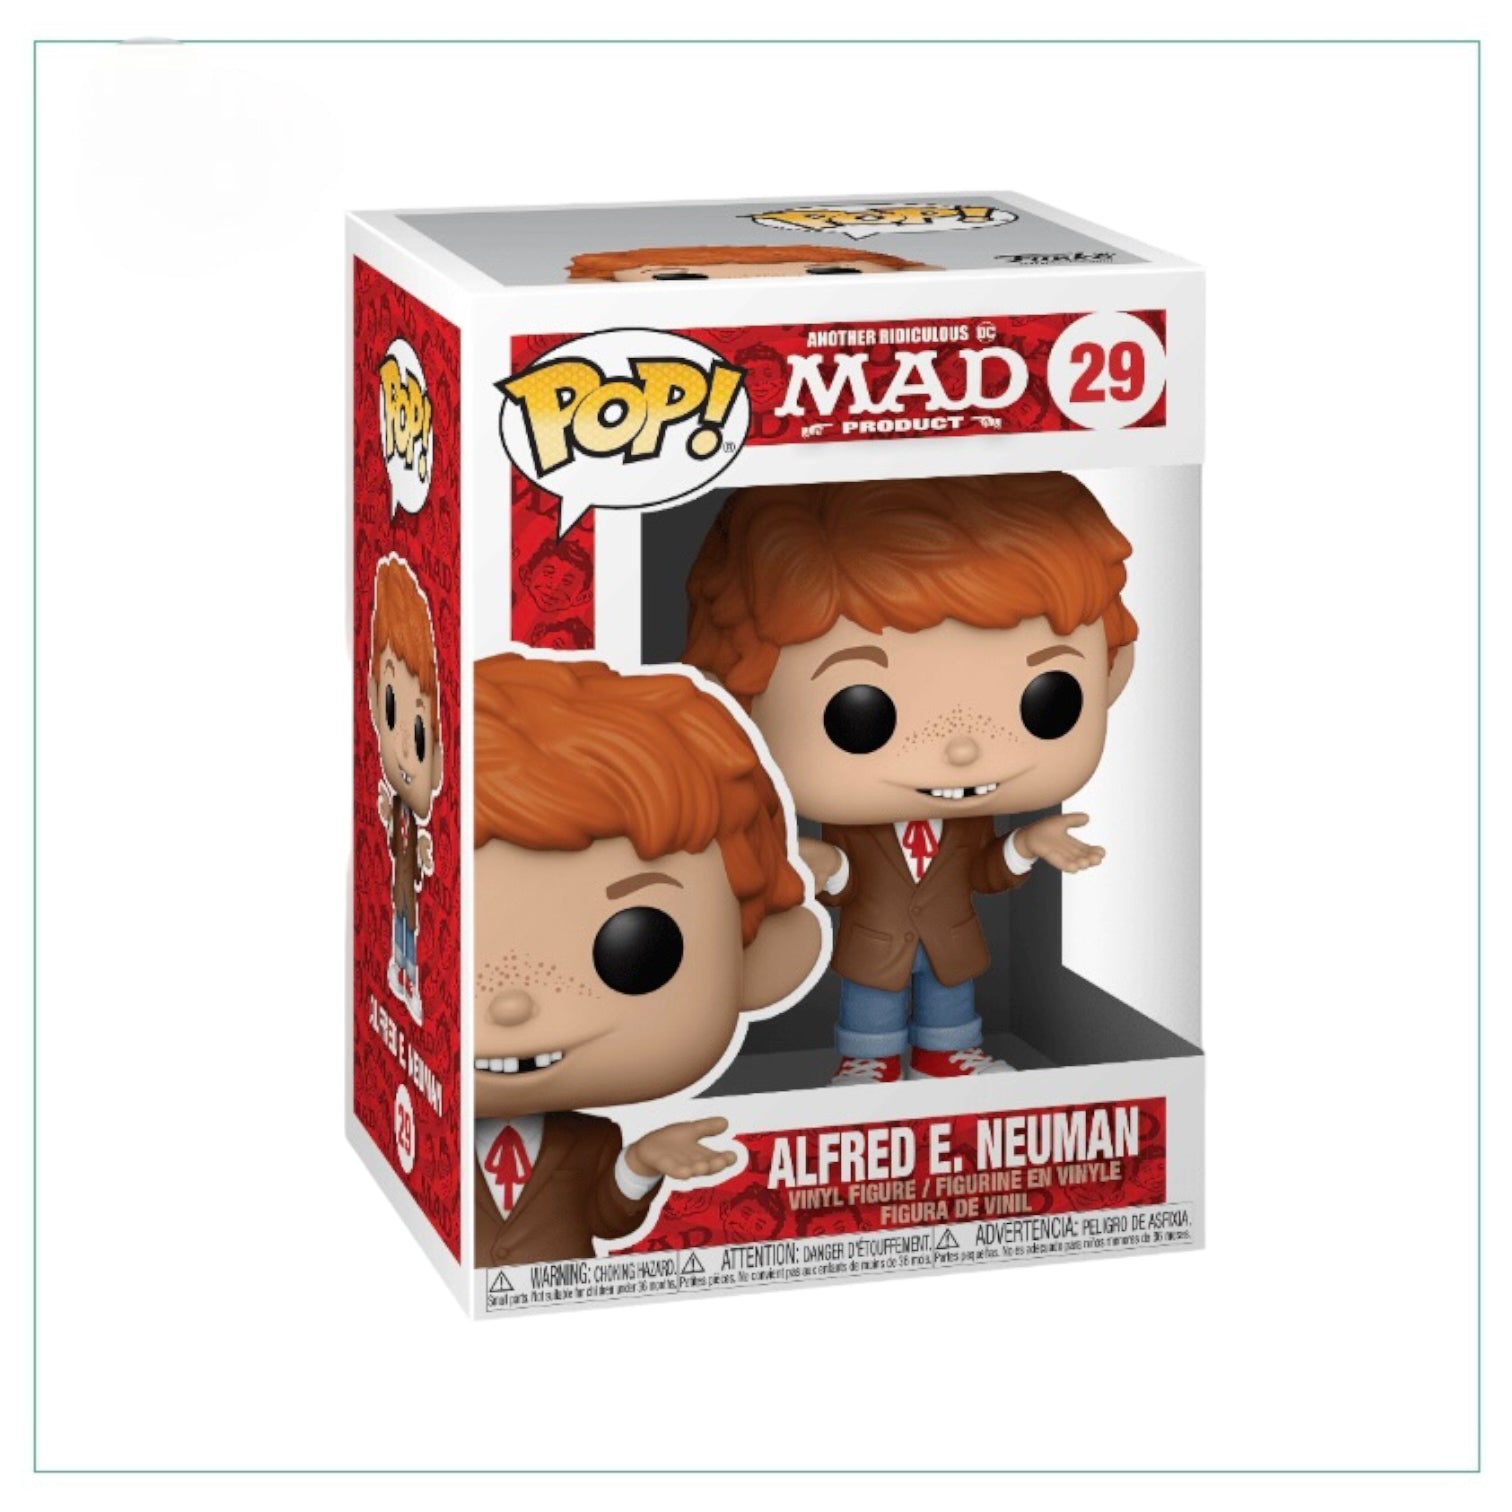 Alfred E.Neuman #29 Funko Pop! - Another Ridiculous MAD Product